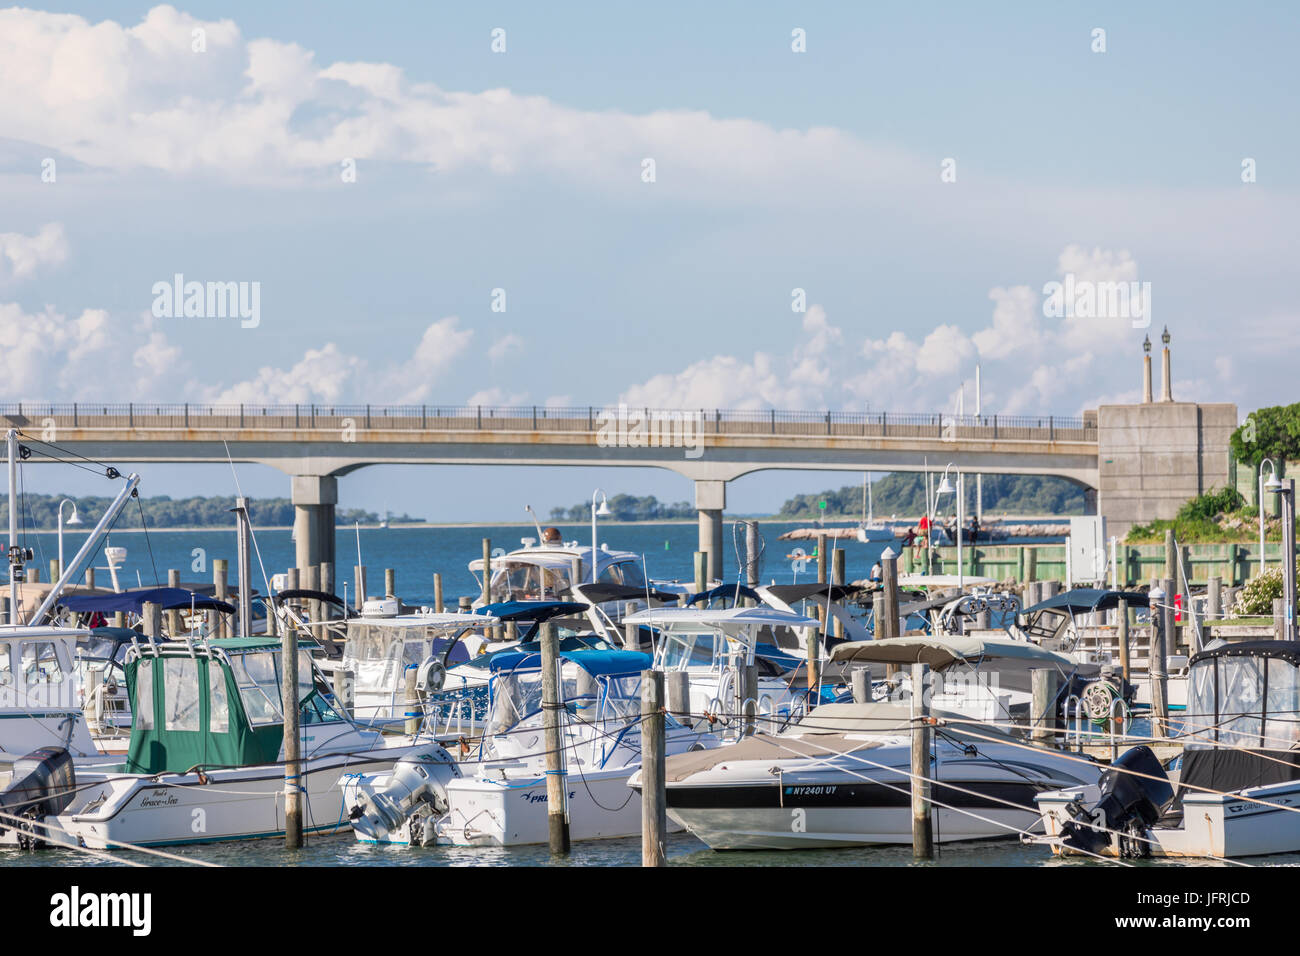 view of marina filled with boats and distant bridge in Sag Harbor, NY Stock Photo